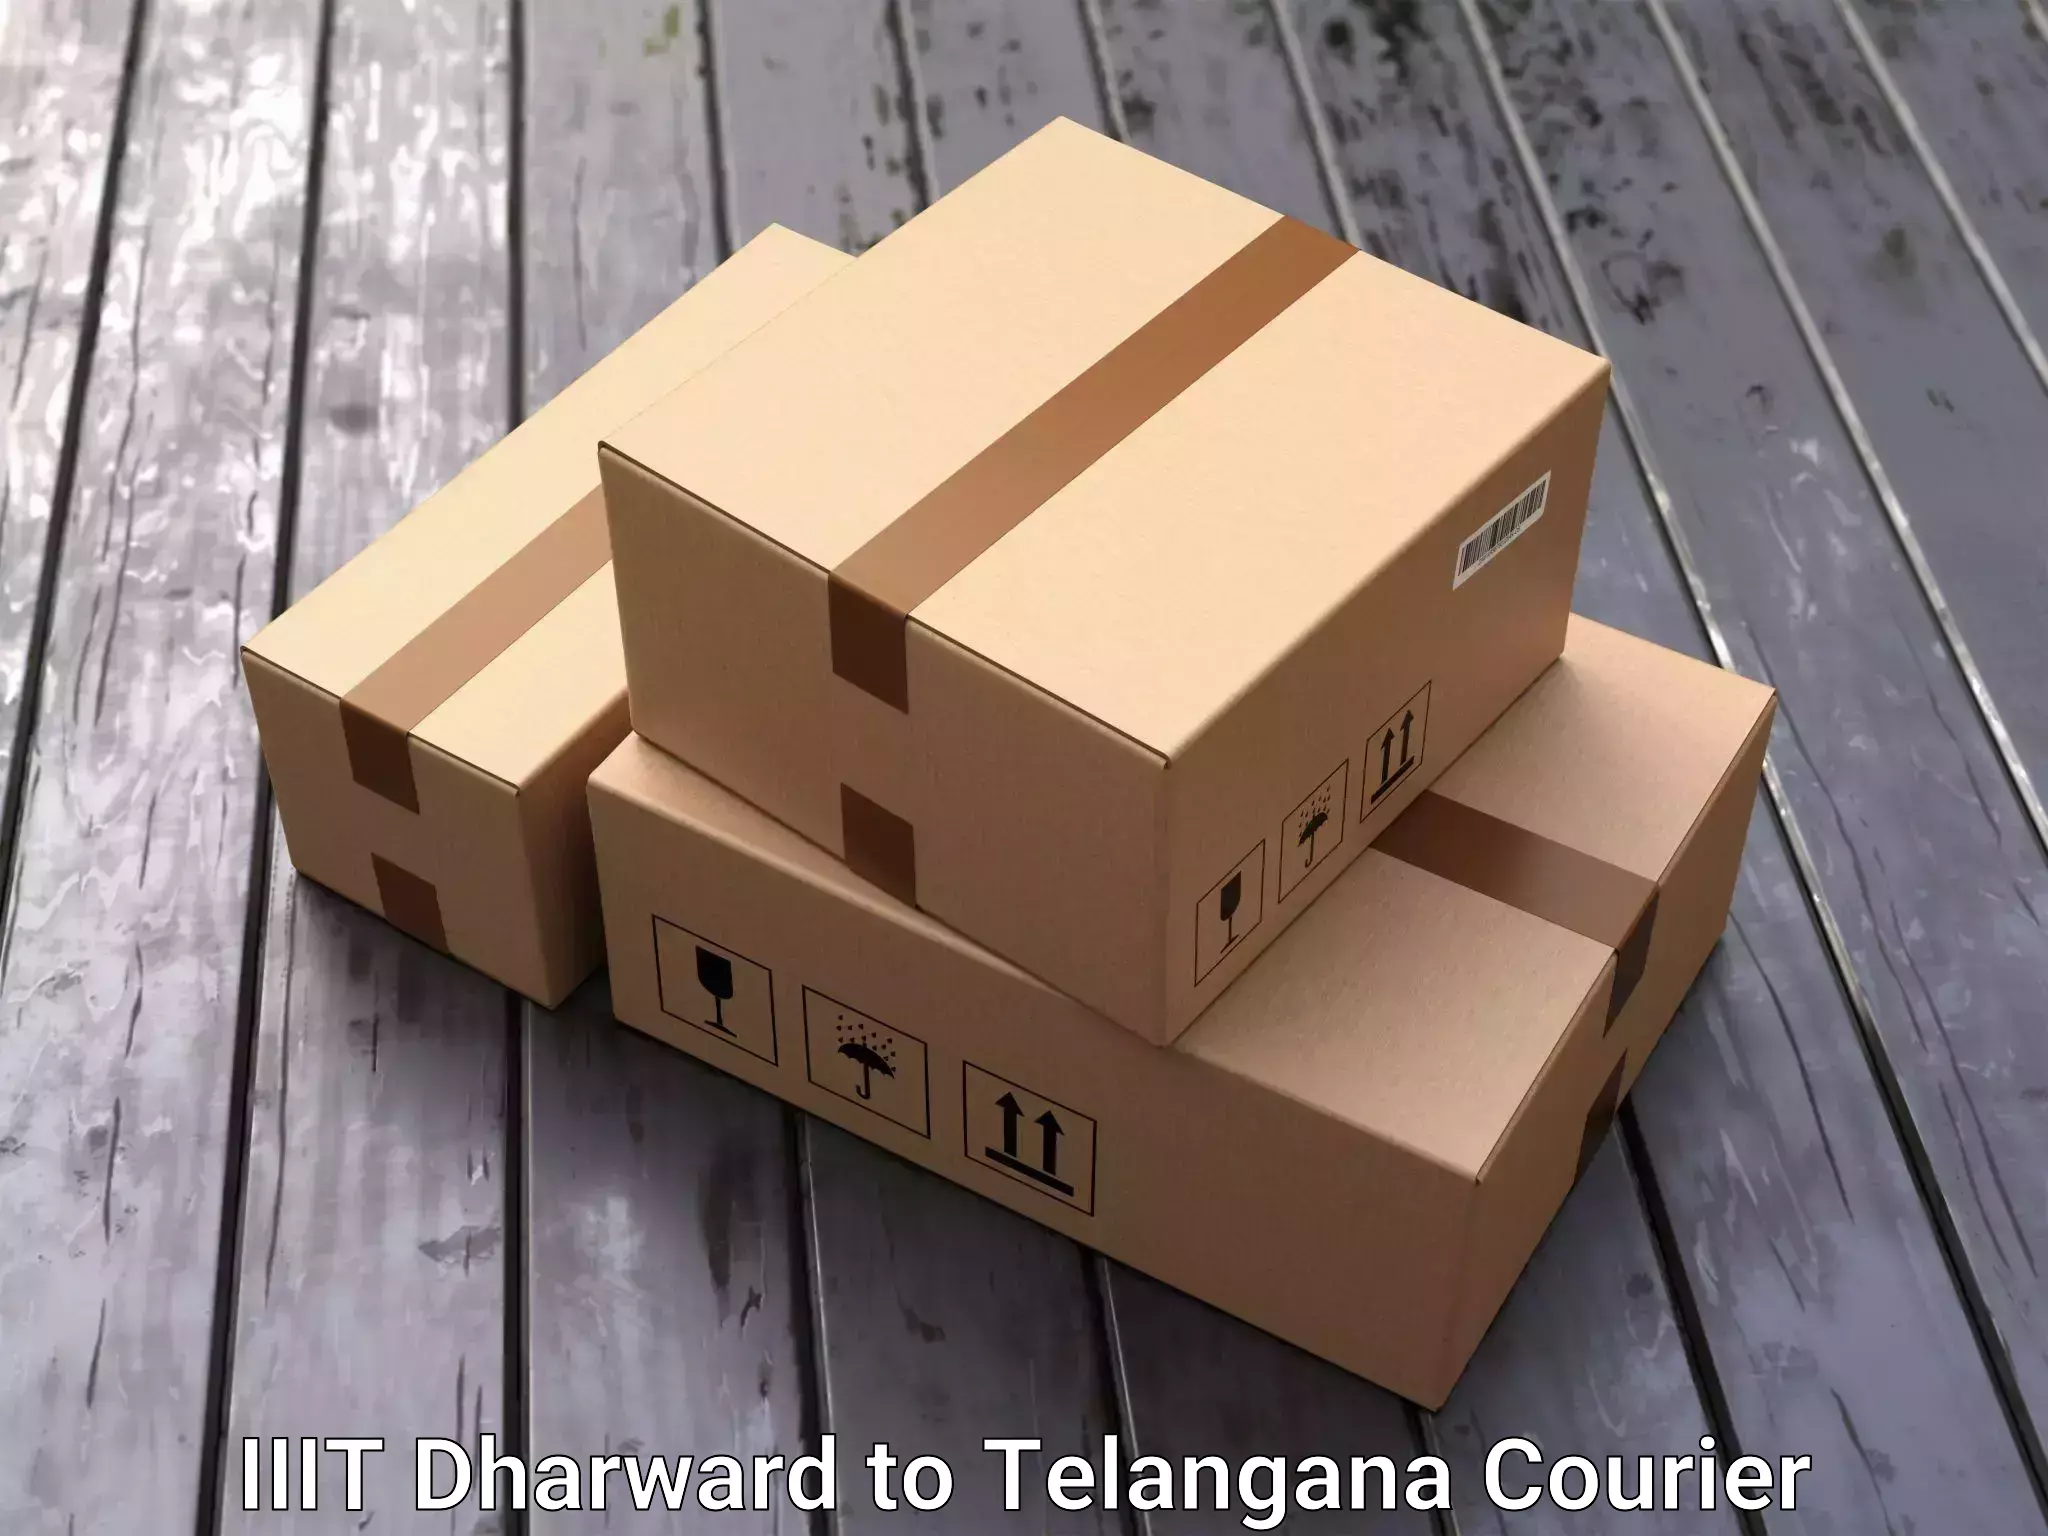 Quality relocation services in IIIT Dharward to Telangana